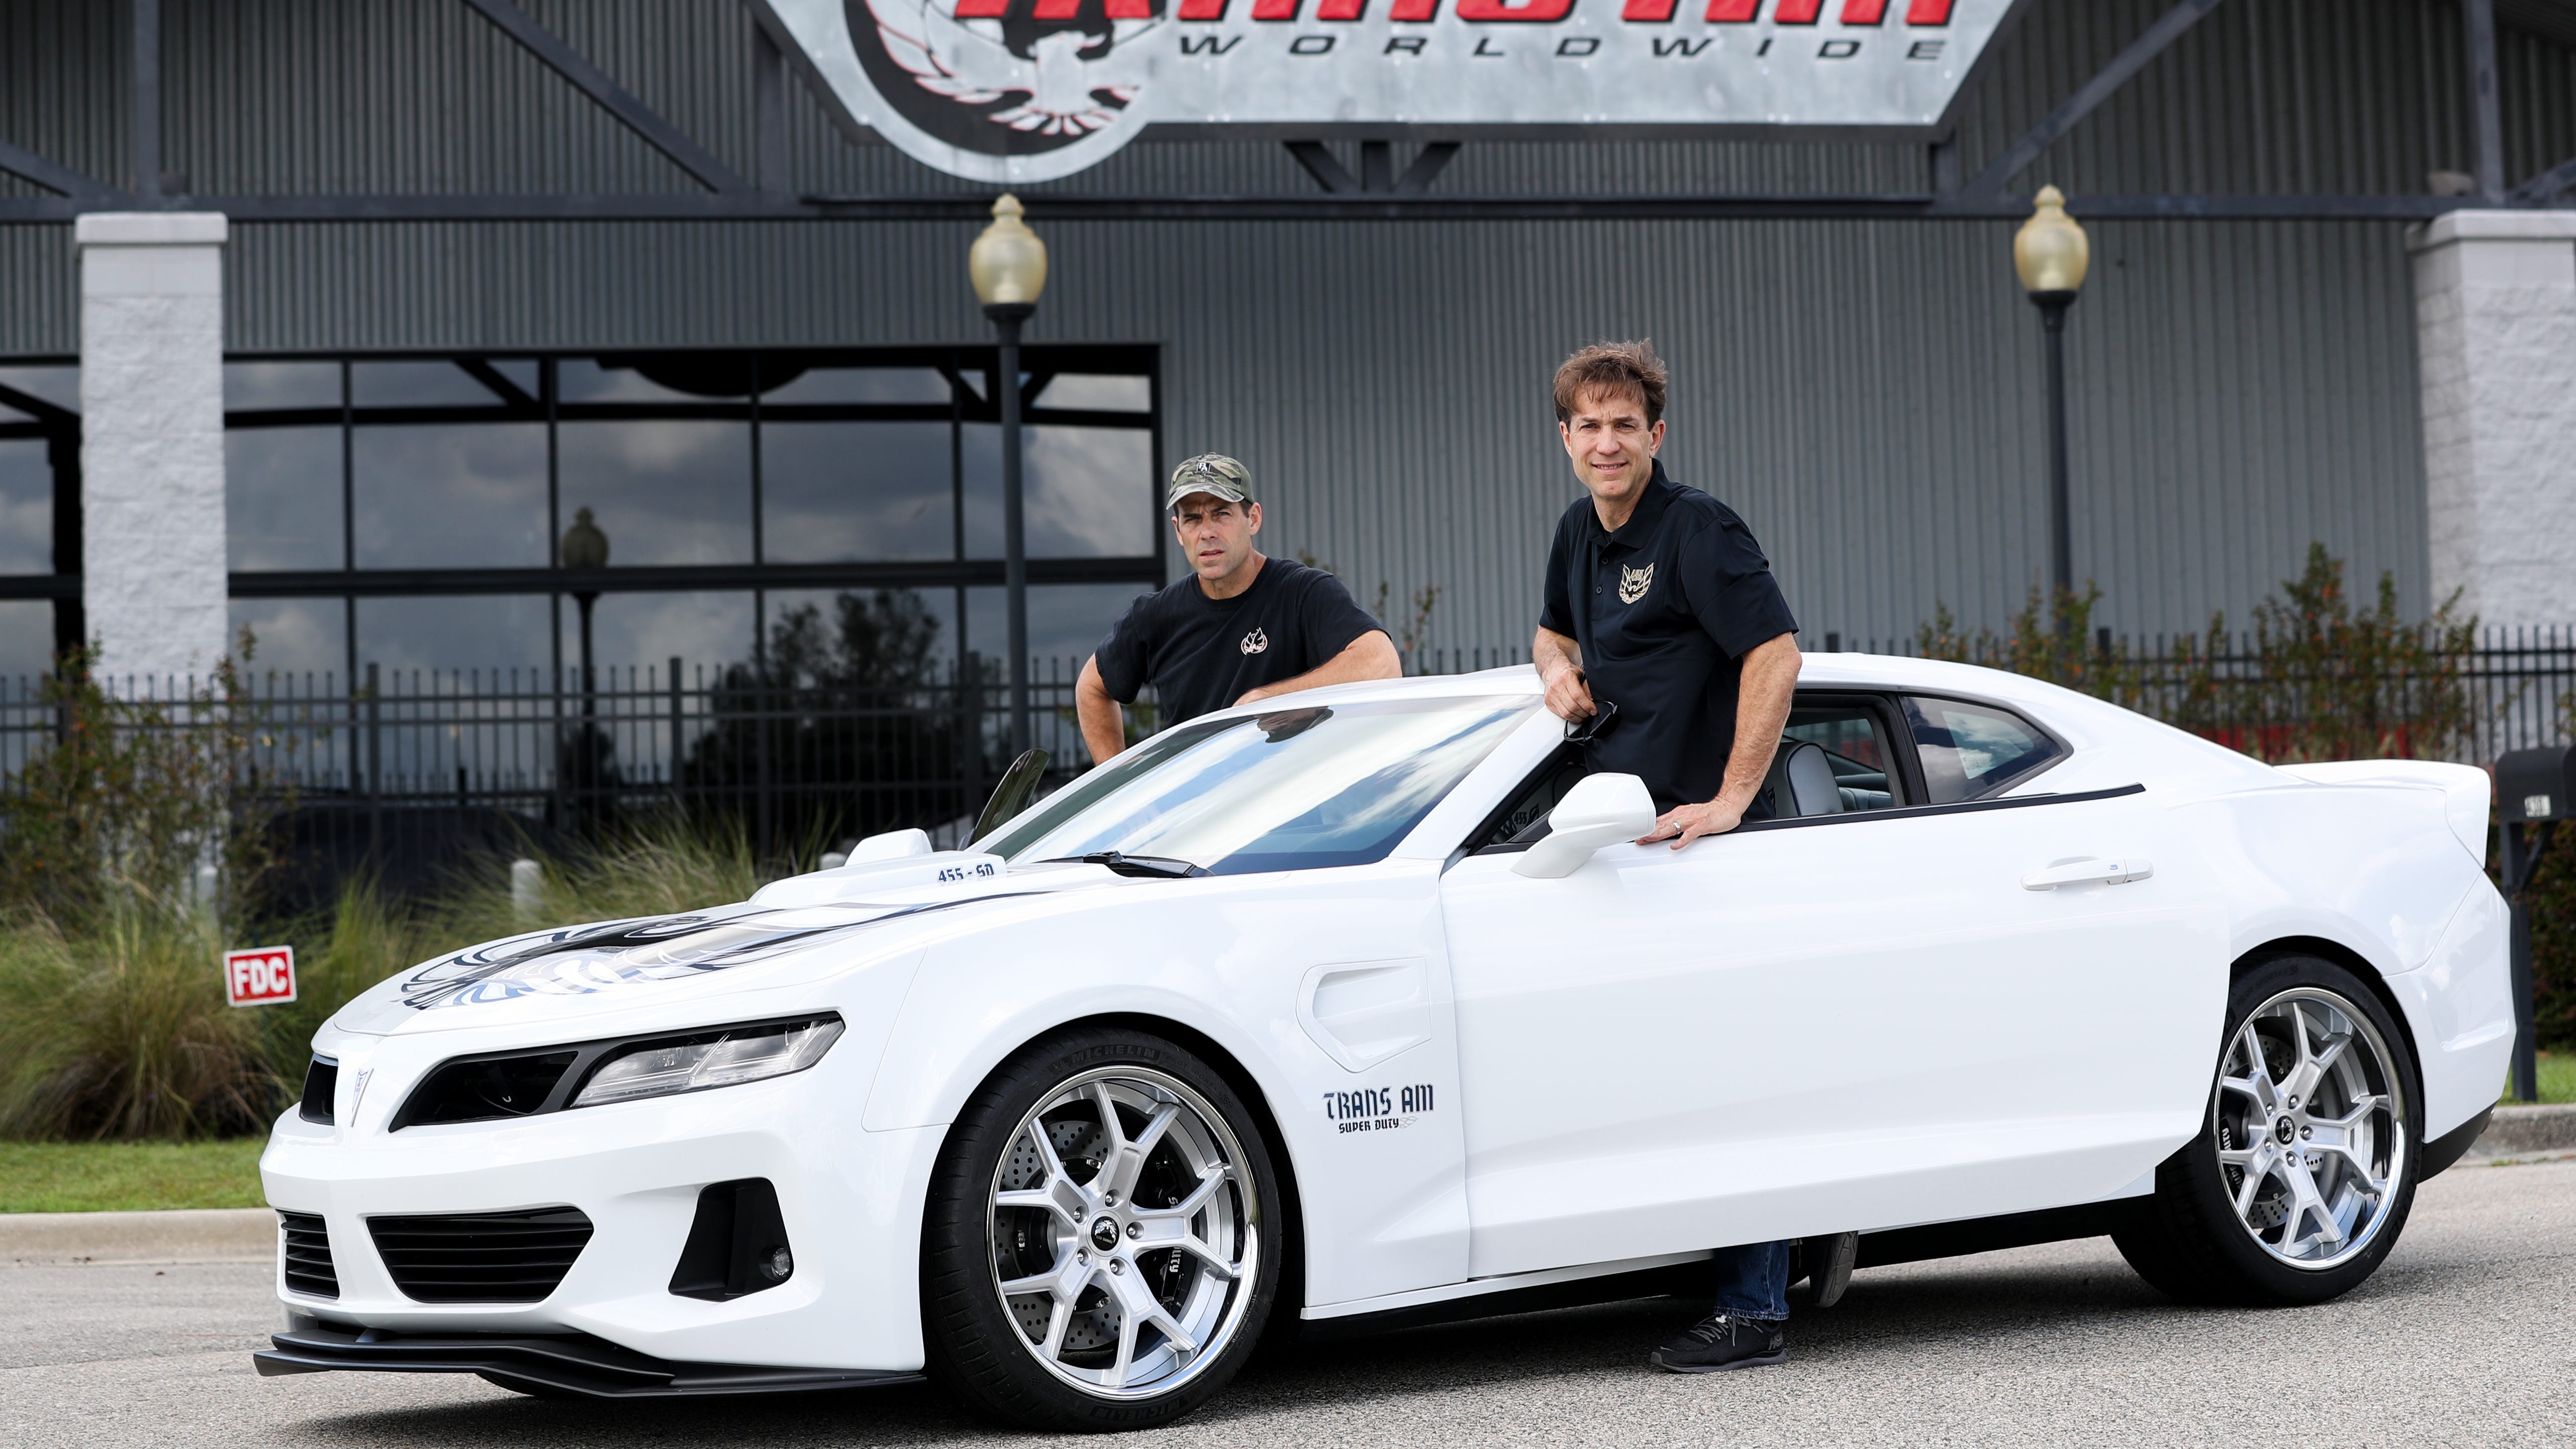 aaron huxley recommends pics of the new trans am pic